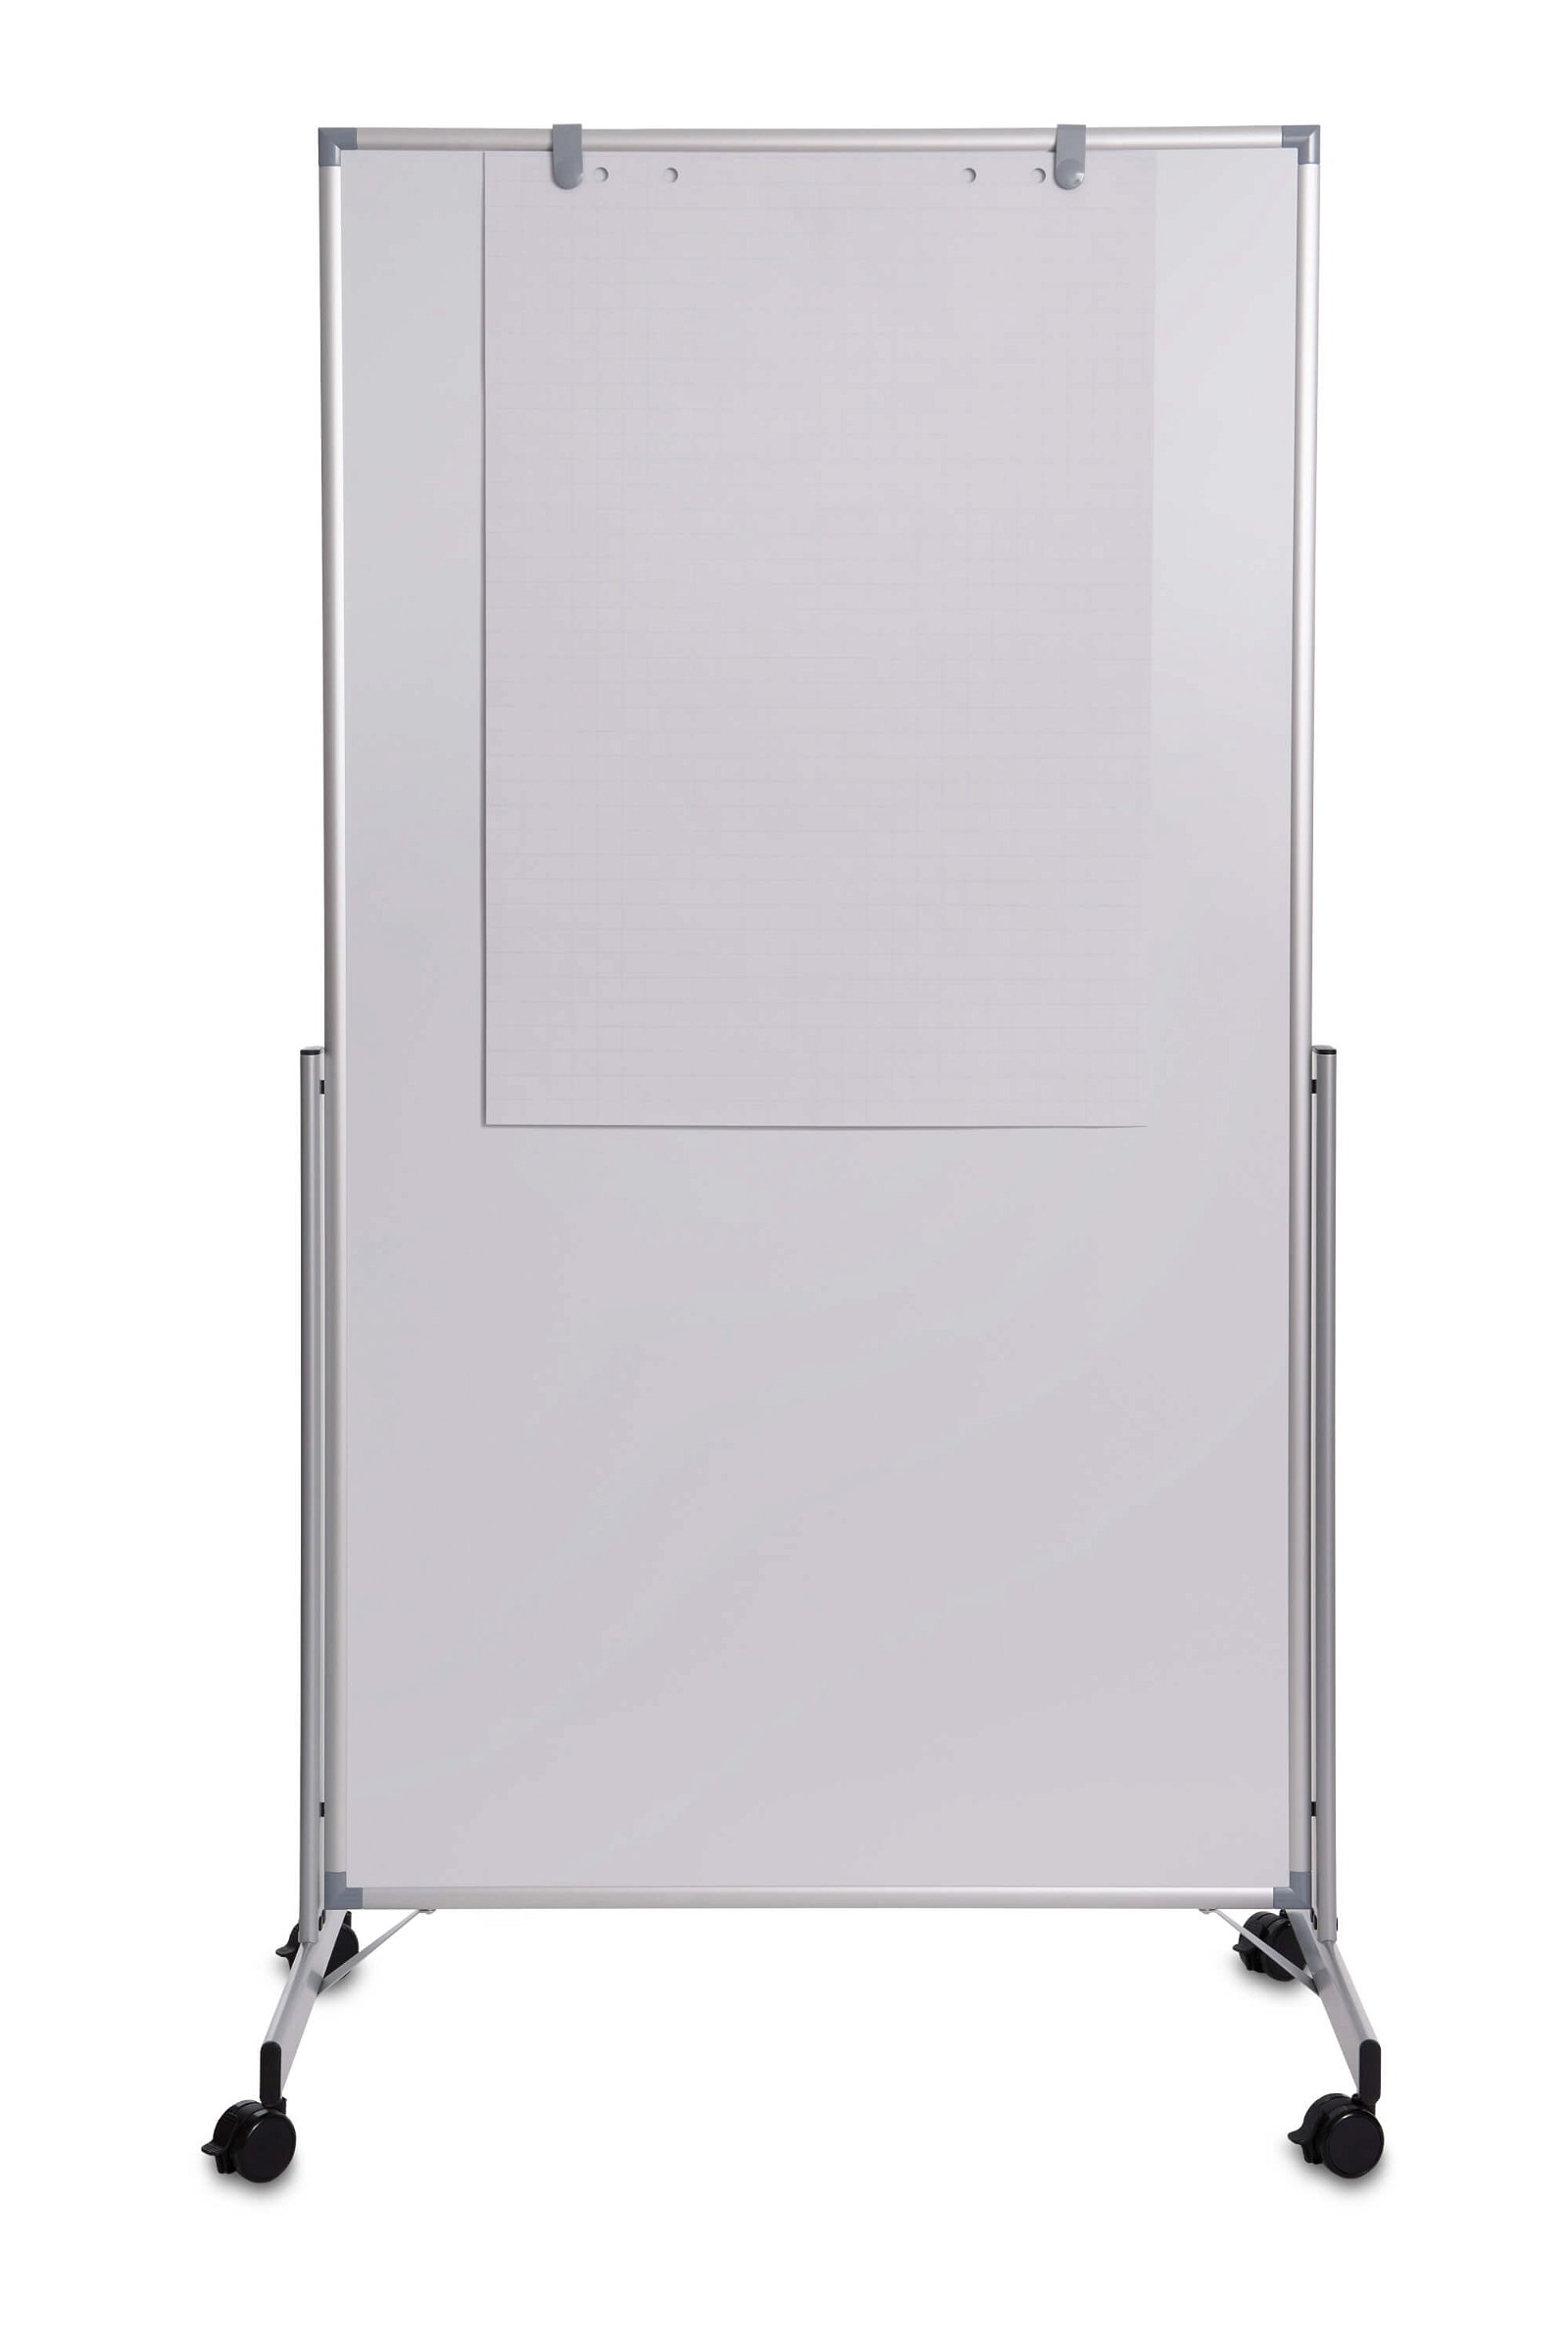 Whiteboard mobil MAULpro easy2move